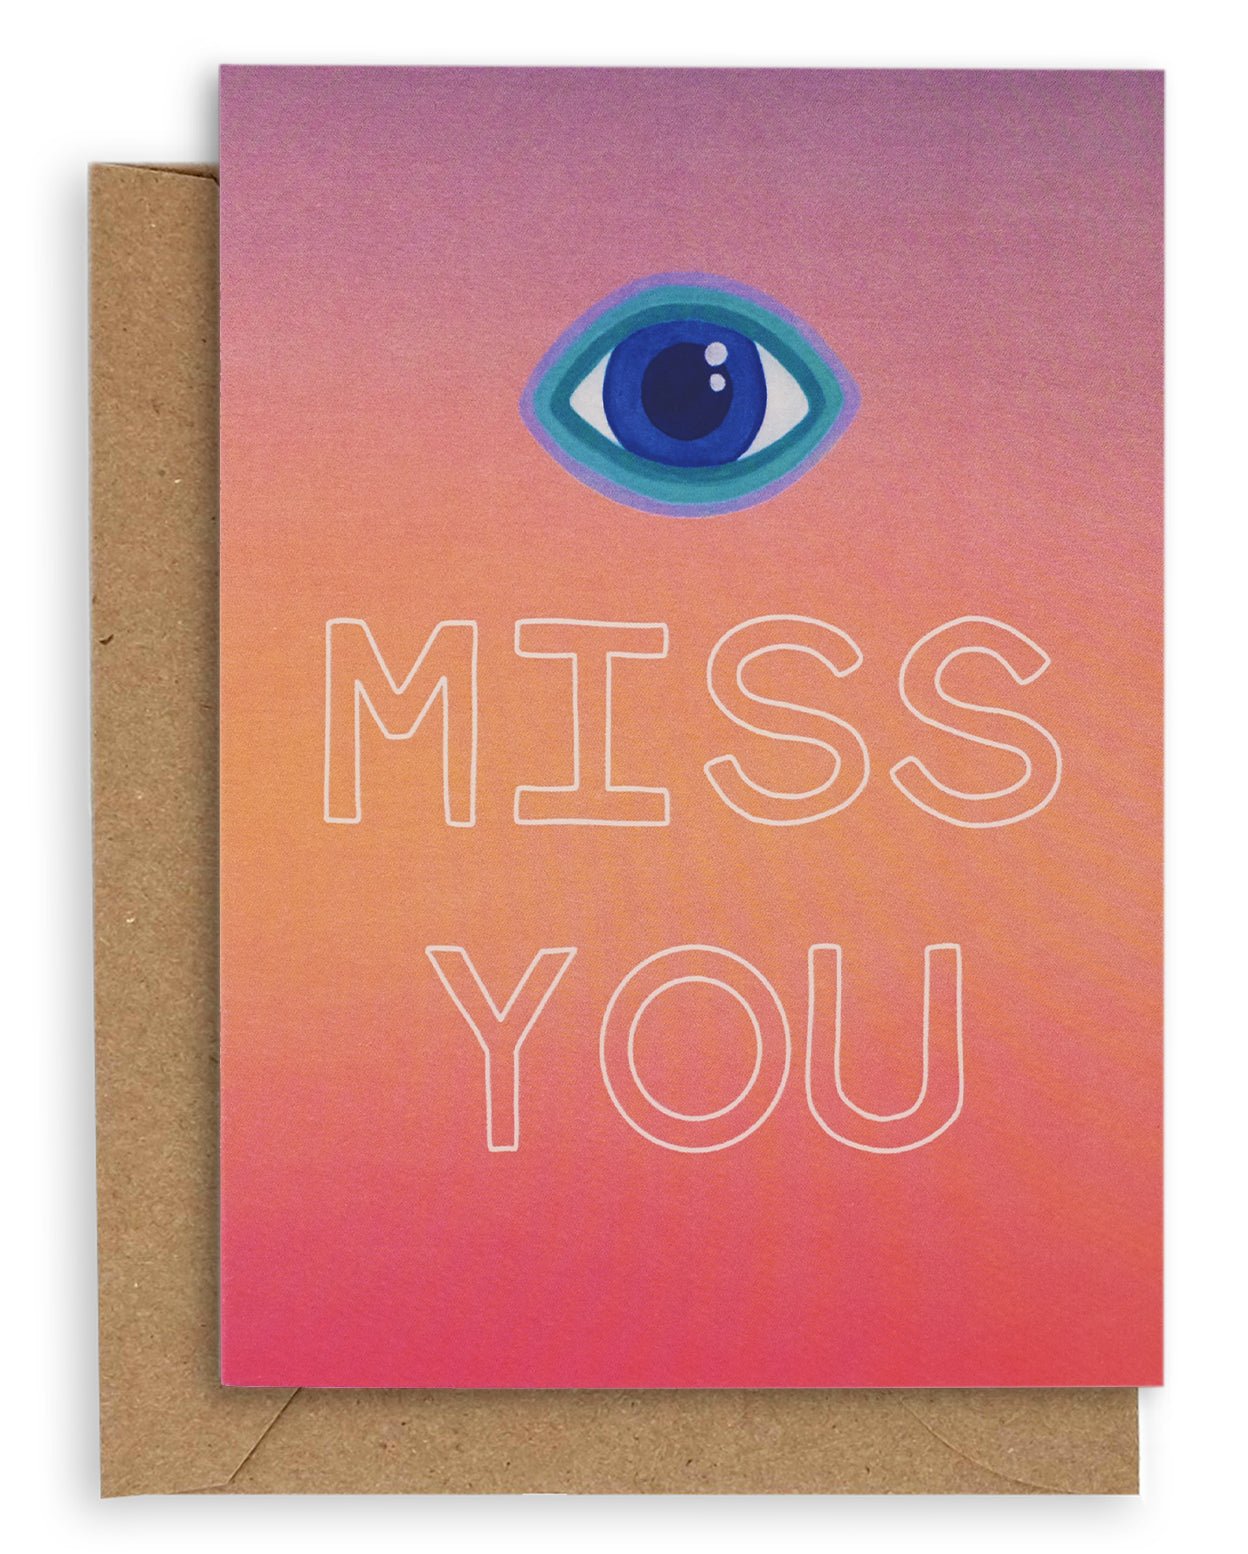 Greeting card with the symbol of an eye followed by the words "Miss You" in white hollow font on a gradient purple, orange and red background. Shown with brown kraft paper envelope.